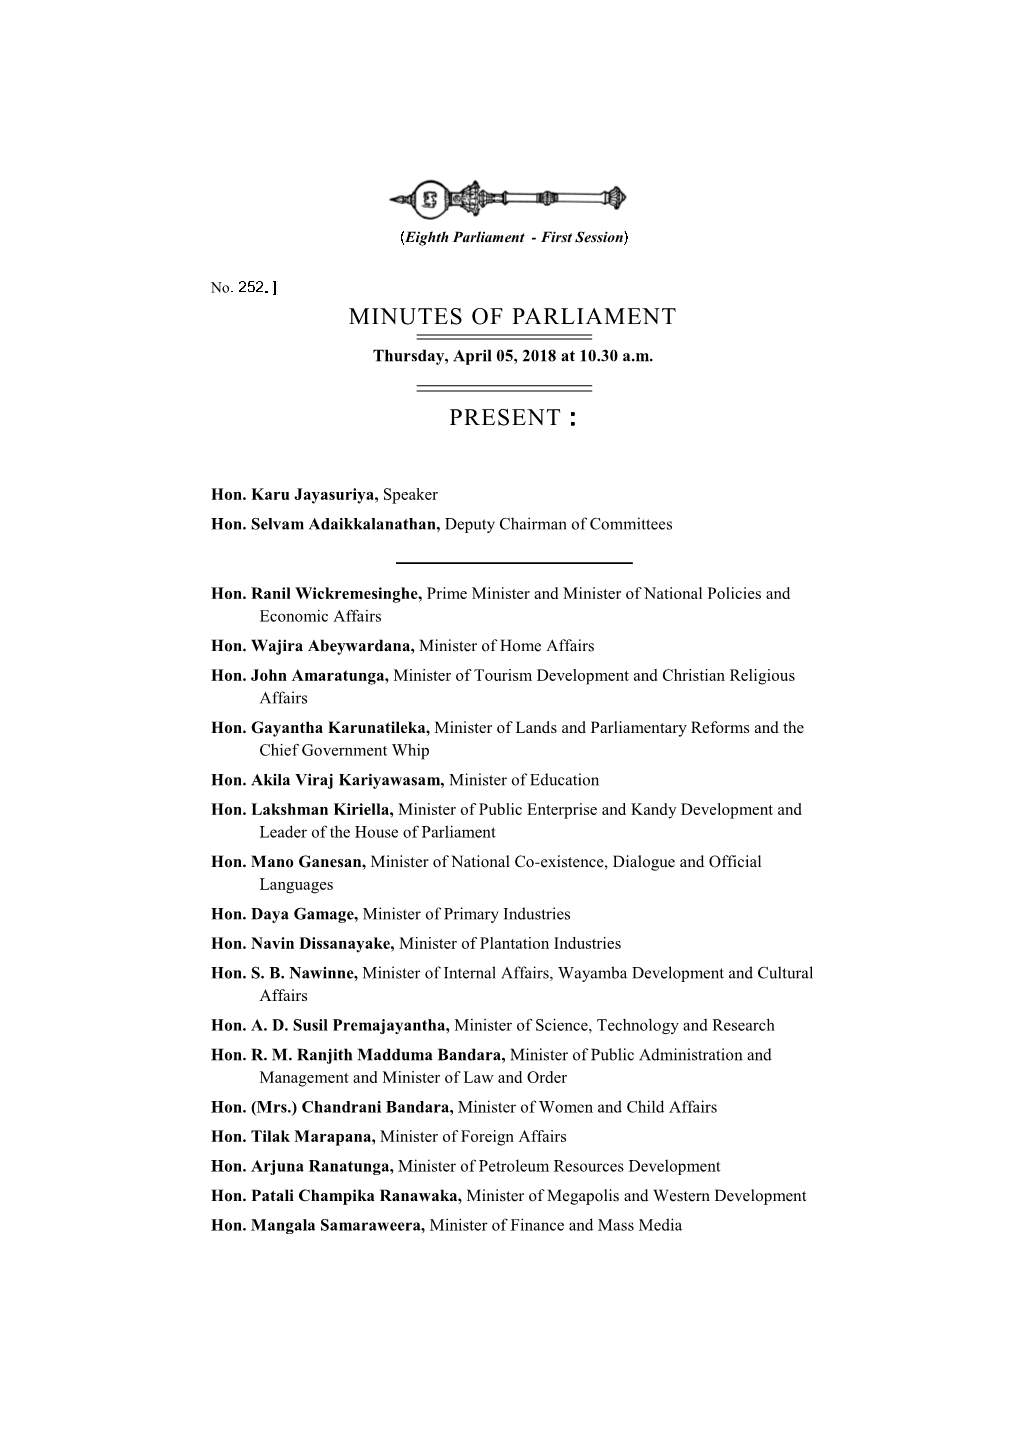 Minutes of Parliament for 05.04.2018